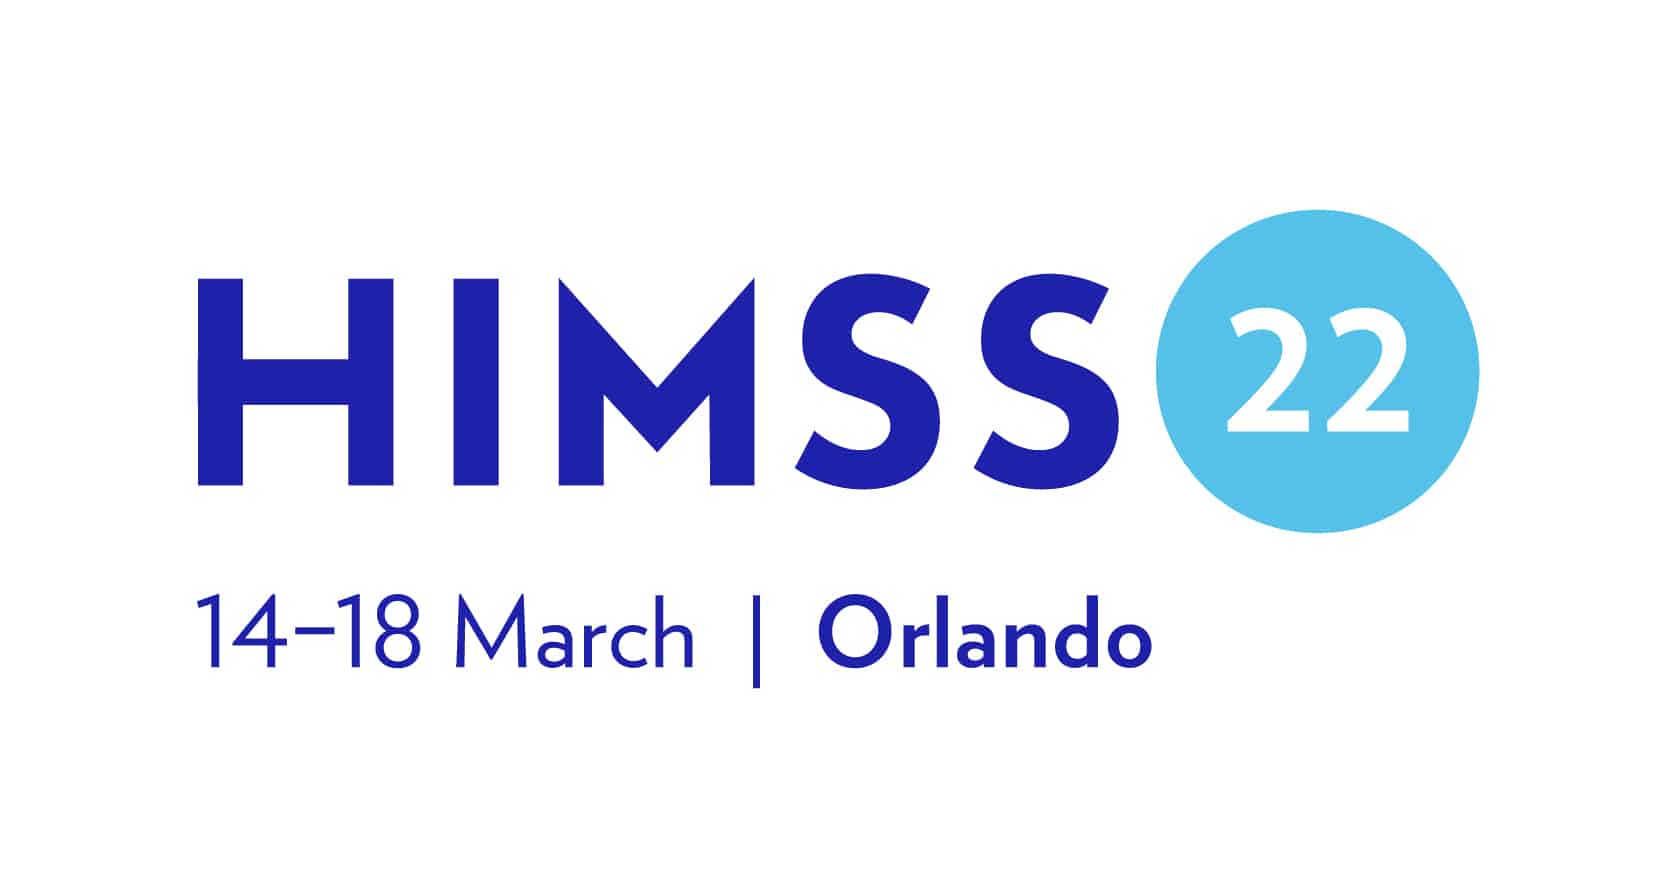 HIMSS22 Global Health Conference & Exhibition